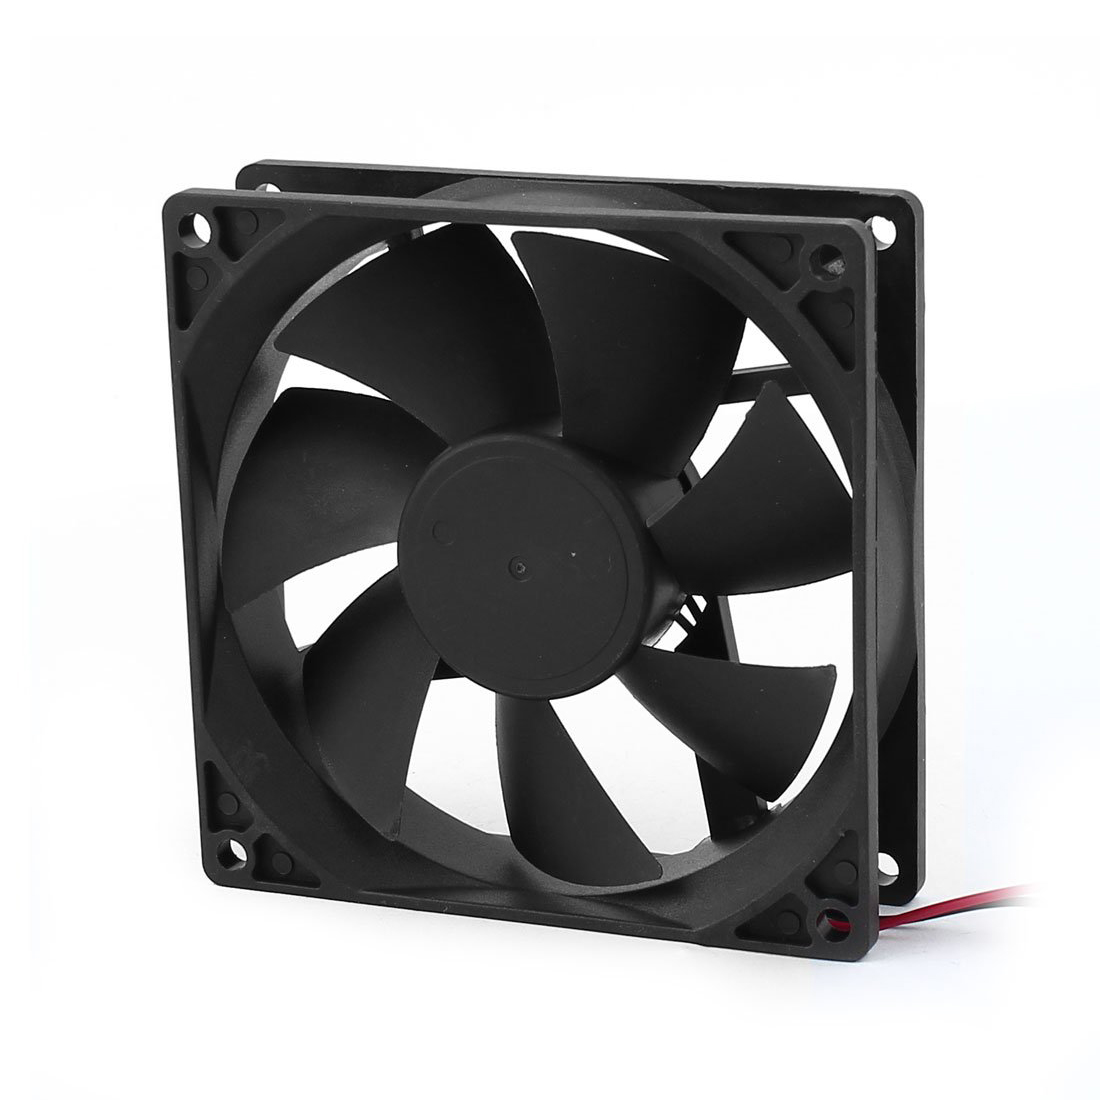 PROMOTION! 90mm x 25mm 9025 2pin 12V DC Brushless PC Case CPU Cooler Cooling Fan